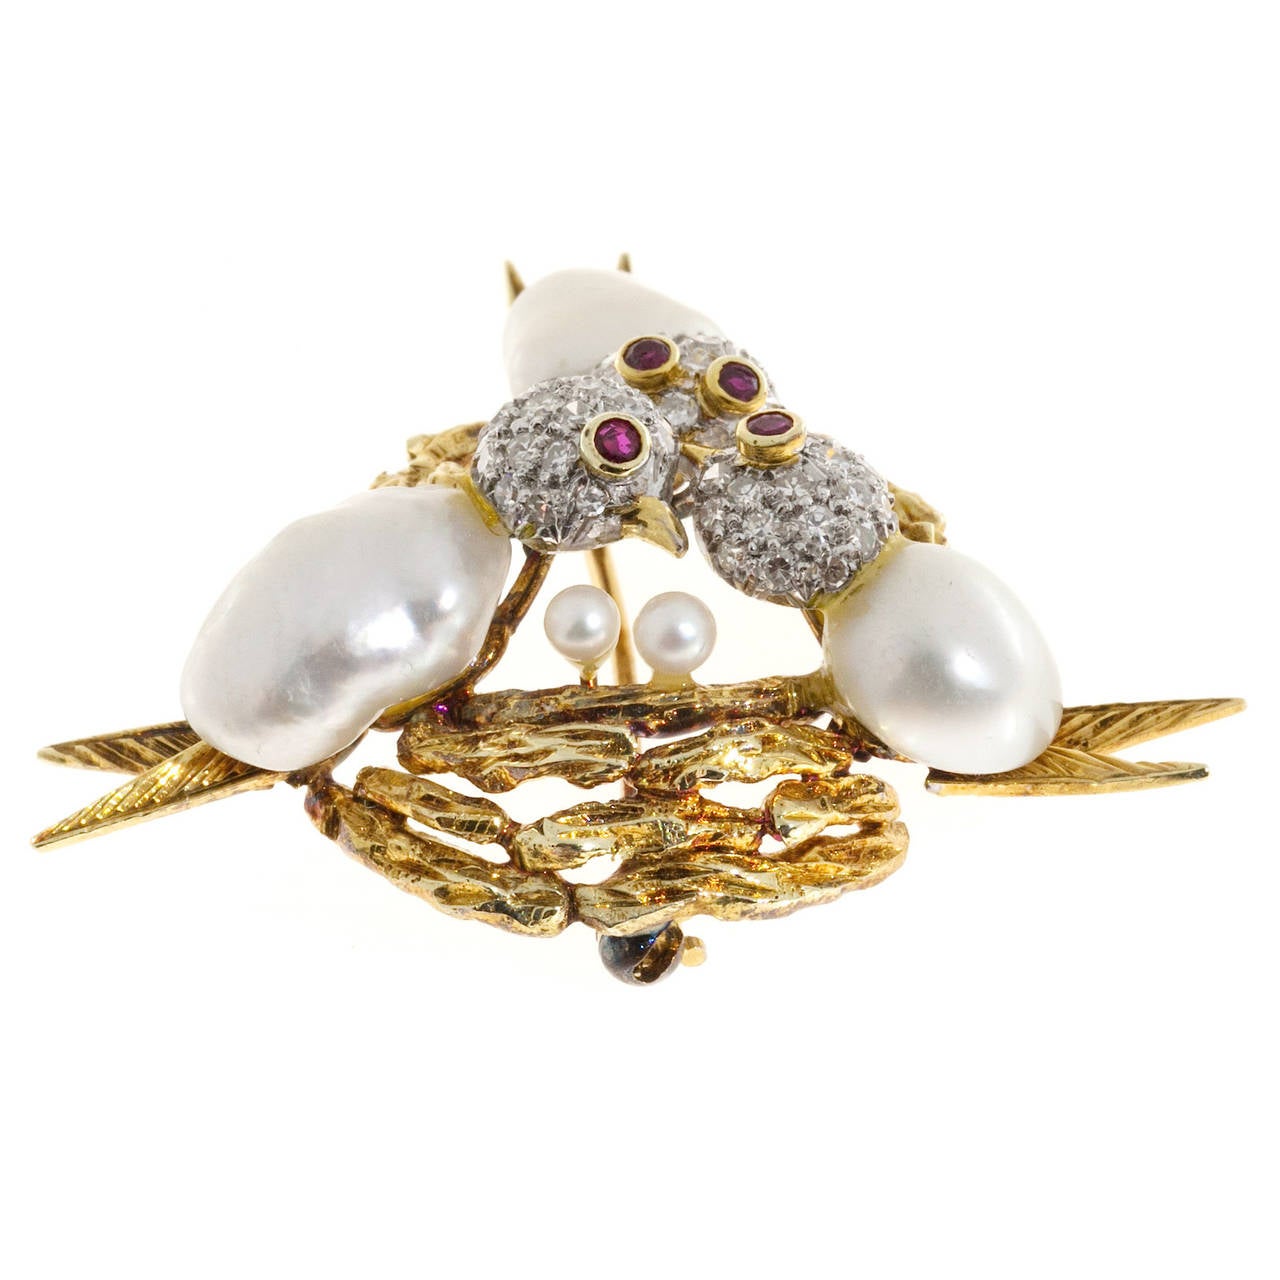 Trio- Three birds nest brooch. circa 1960's with 3 3-D birds with pearl bodies, diamond heads and ruby eyes, set in a 14k yellow gold nest. 

45 single cut diamonds, approx. total weight .30cts, F, VS
2 2mm round pearls
4 1.5mm genuine Ruby eyes
3